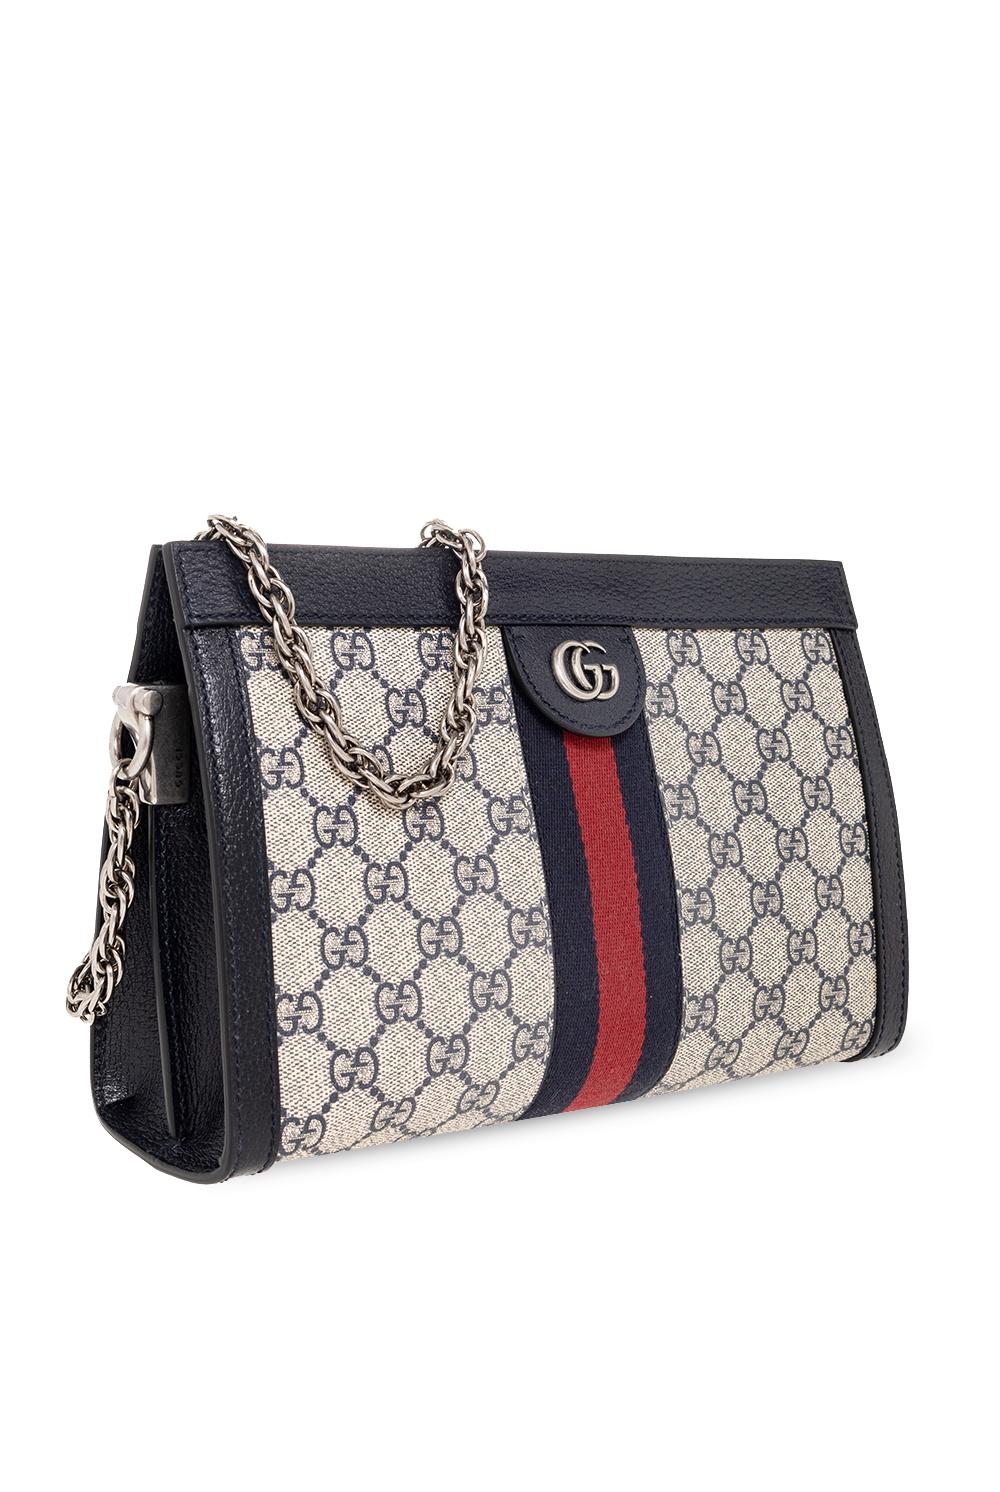 Buy Gucci Ophidia GG Small Shoulder Bag 'Beige/White' - 598125